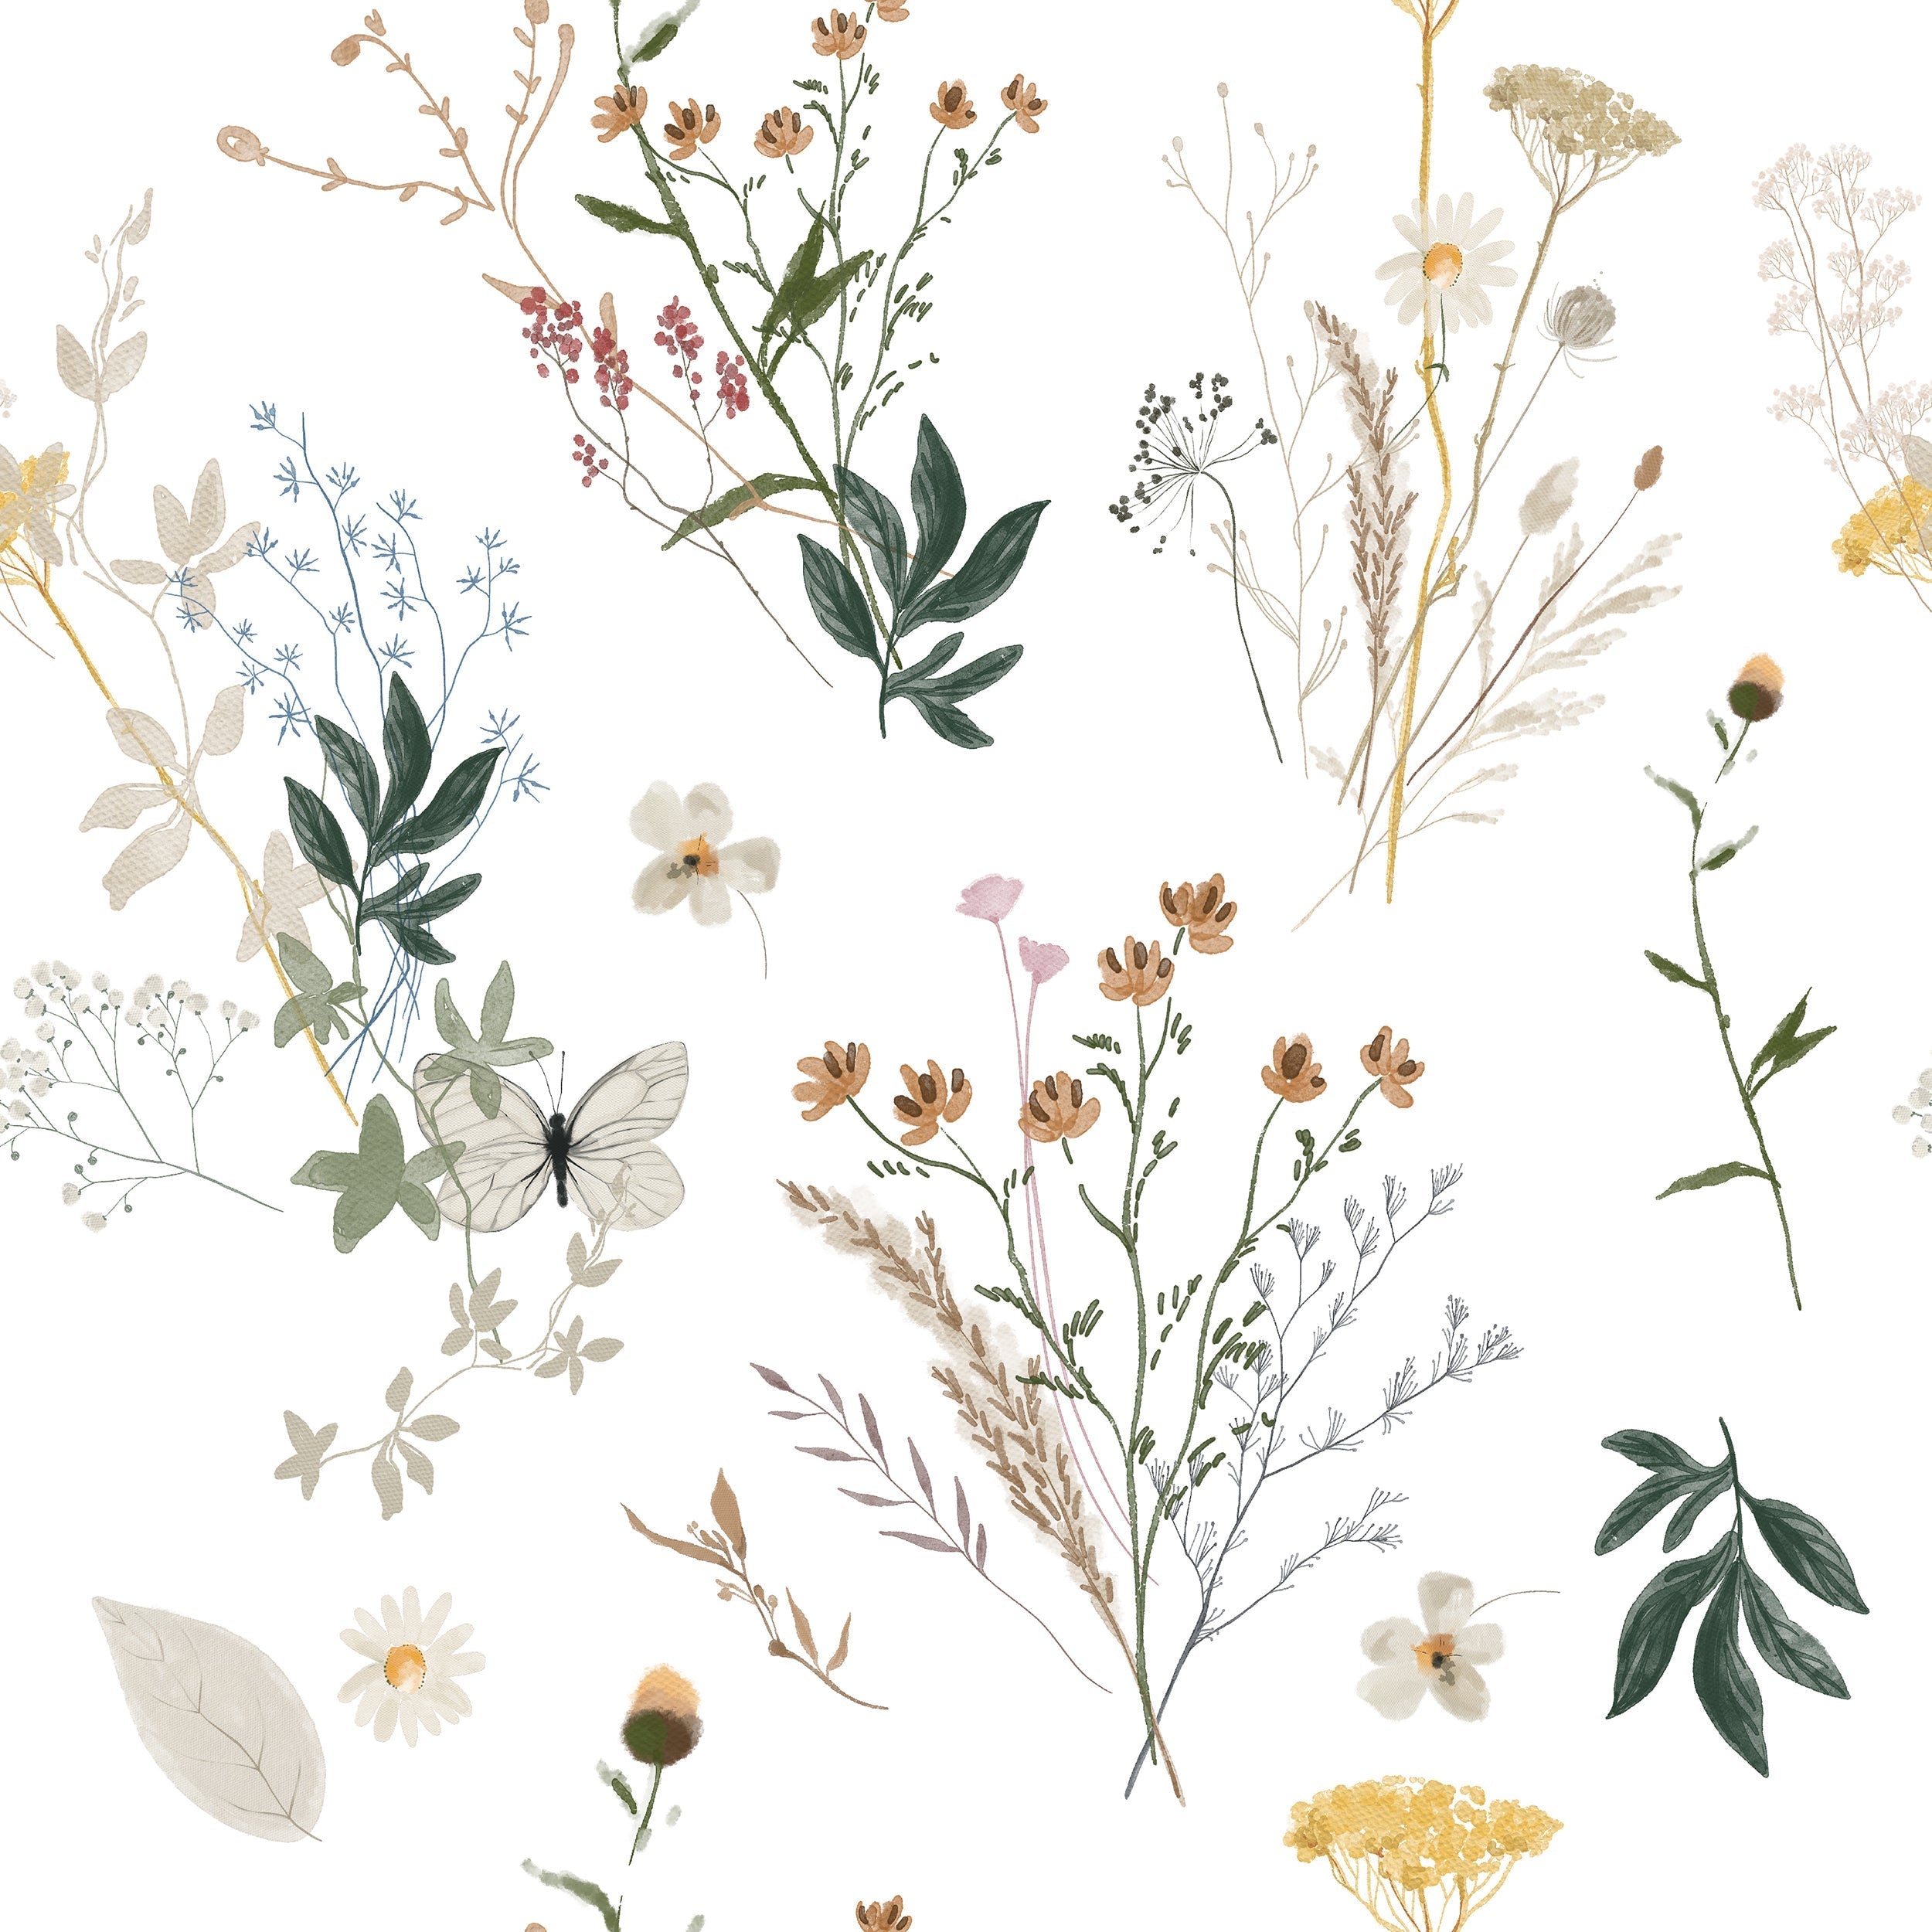 A beautifully detailed pattern of various botanical illustrations on a seamless wallpaper design. The image showcases a variety of delicate flowers, small butterflies, and leaves in soft, muted tones of green, yellow, and blue, creating a tranquil and natural aesthetic.